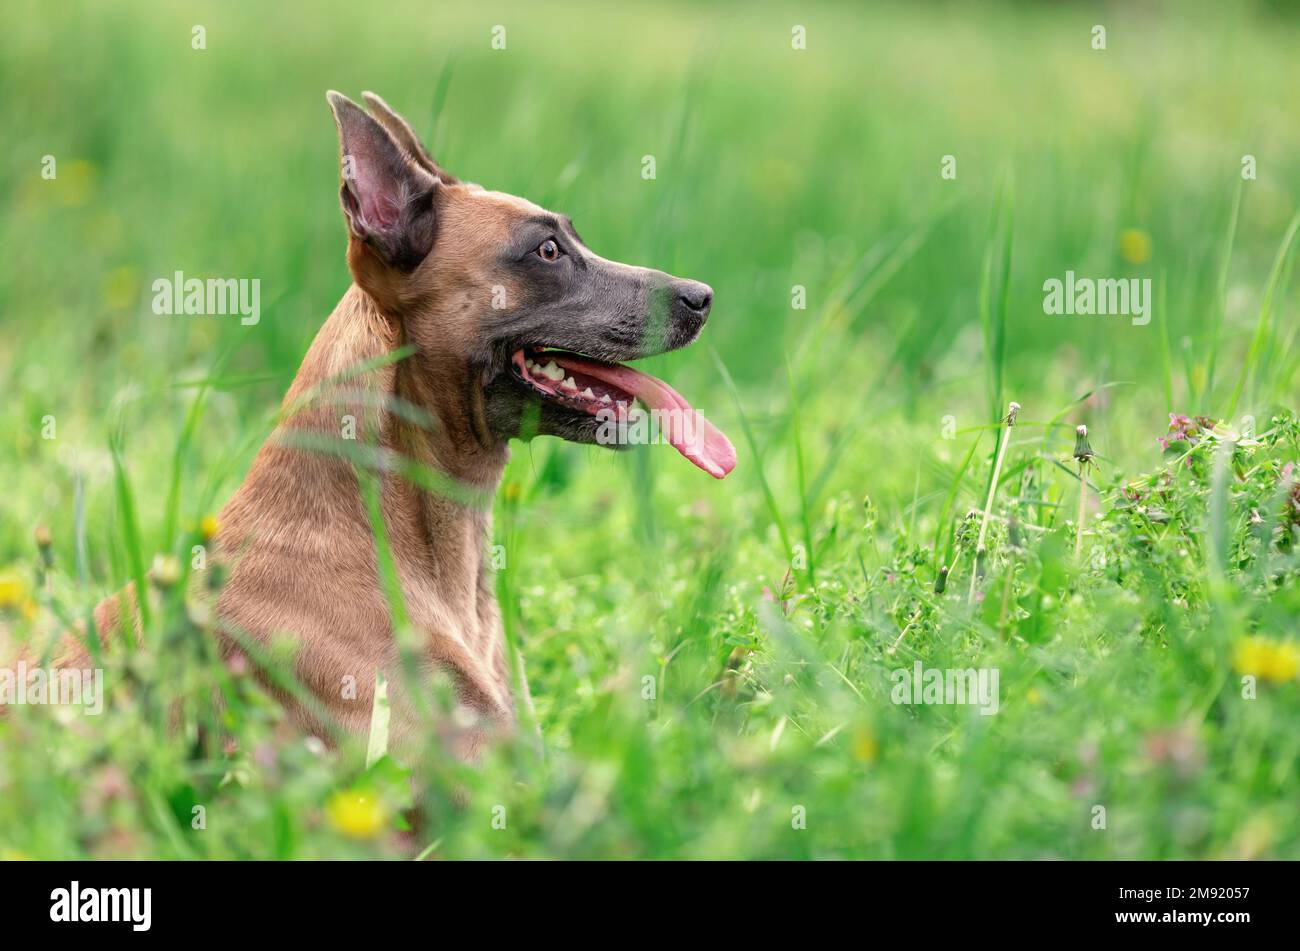 Funny smiling dog of belgian malinois breed lying in the grass Stock Photo